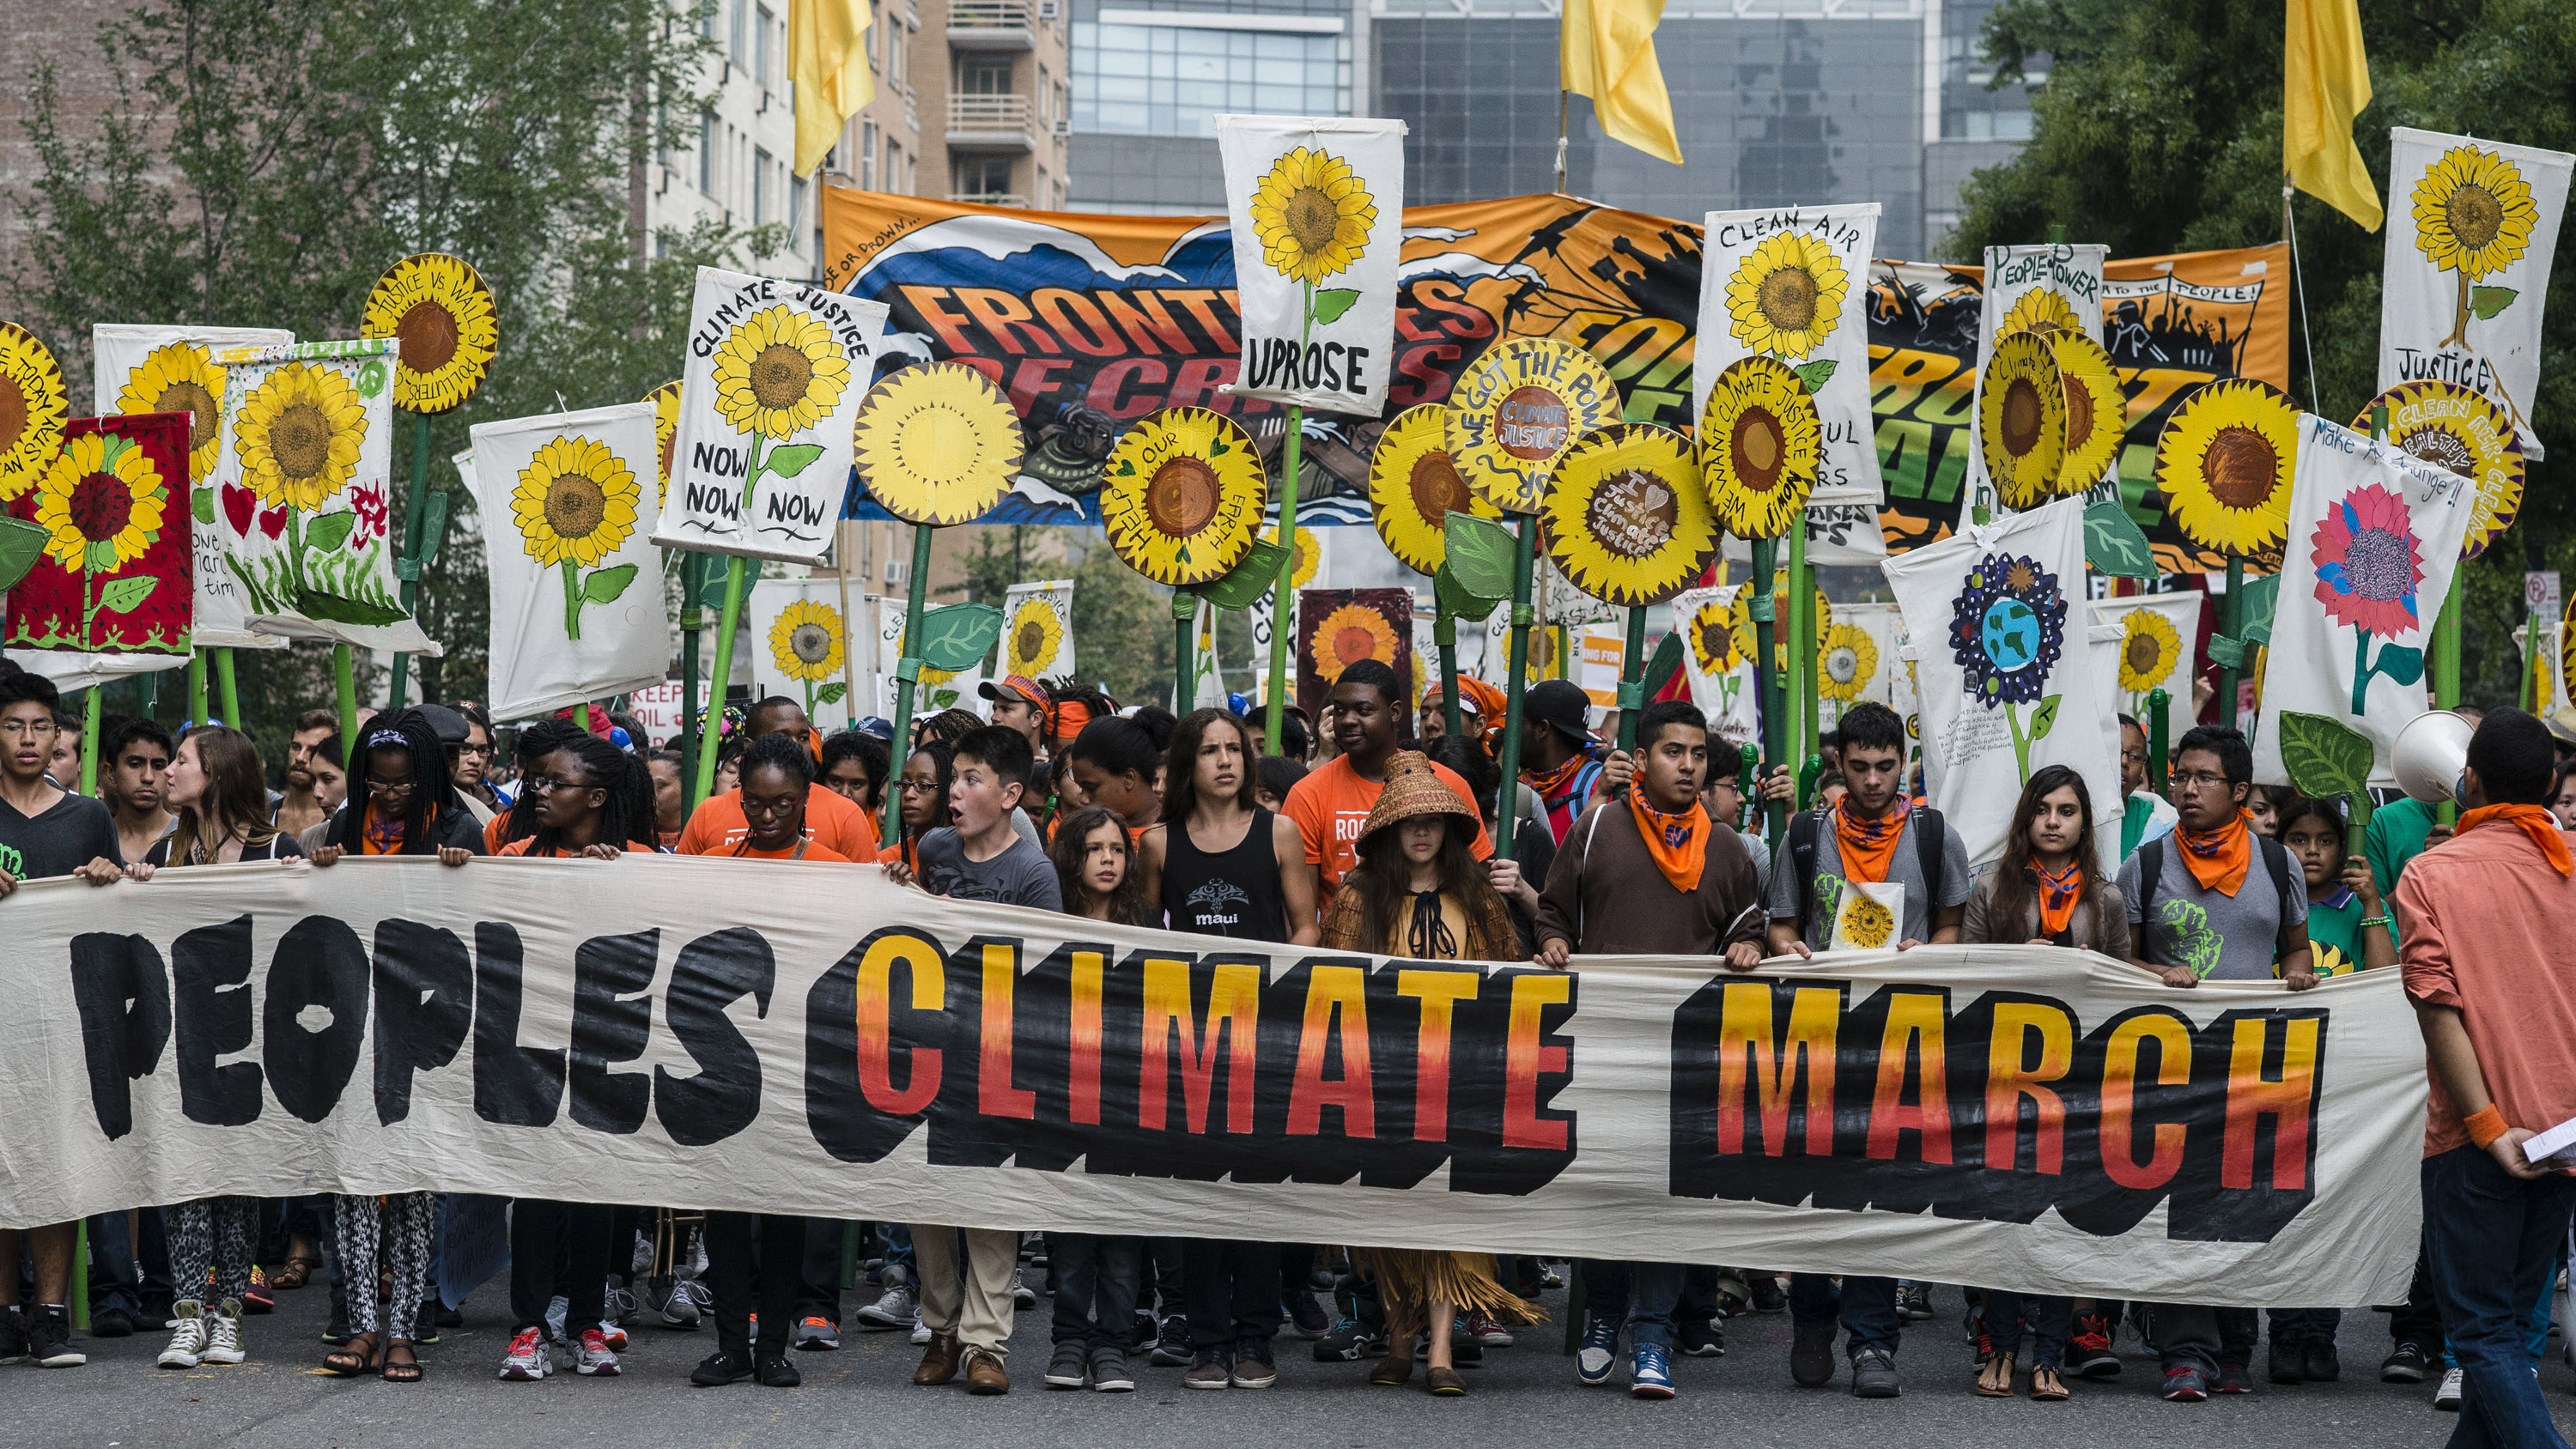 Led by grassroots communities of color, over 400,000 people filled the streets of New York on Sept 21, 2014 to protest the UN 2014 Climate Summit.  Photographer: Timothy Fadek/Bloomberg